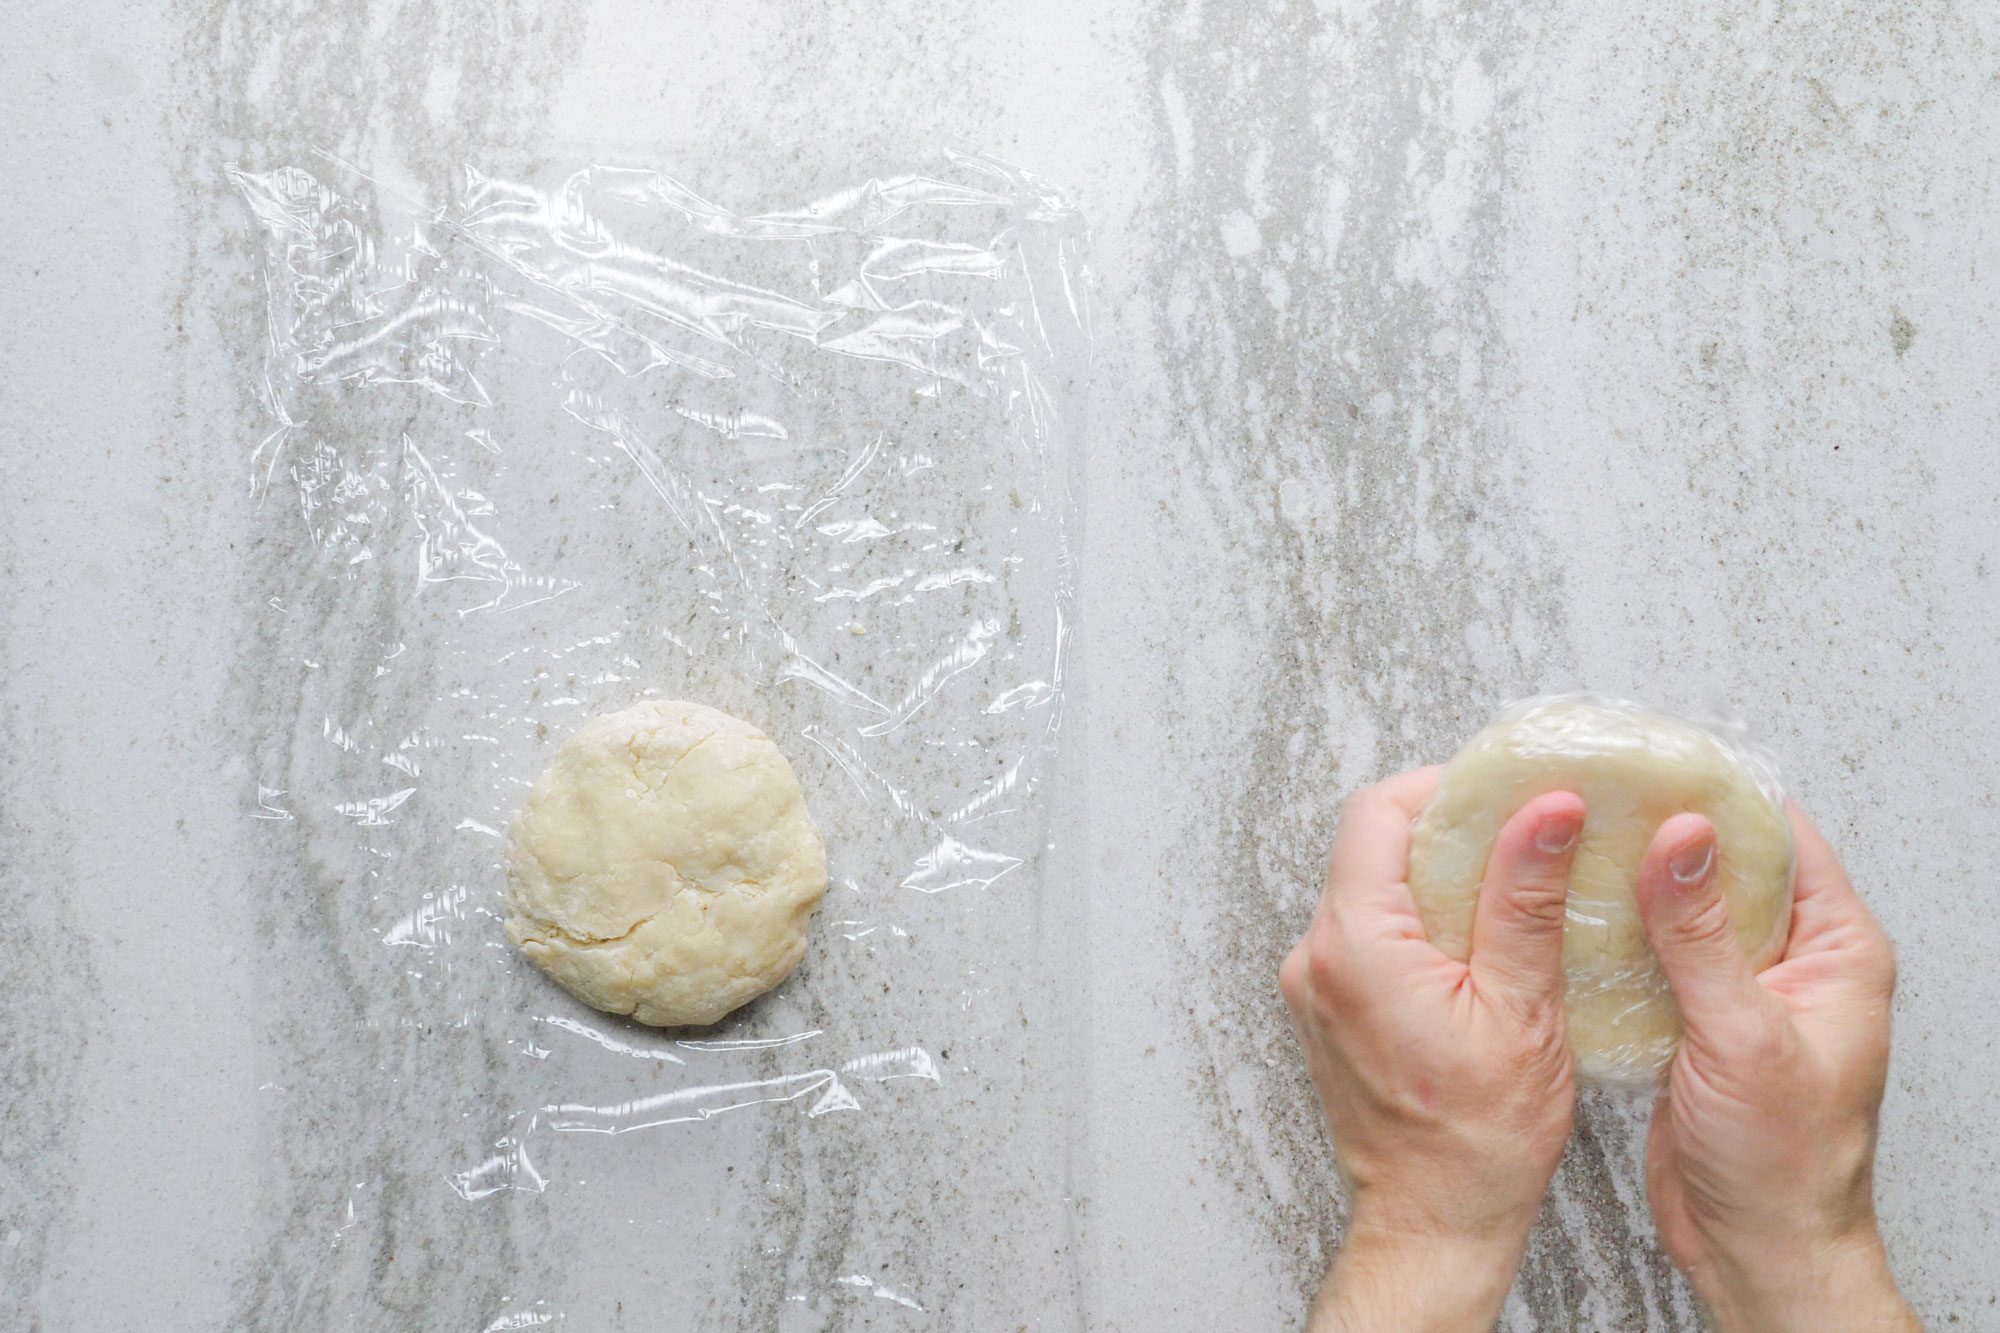 Wrap and refrigerate disk shaped dough overnight